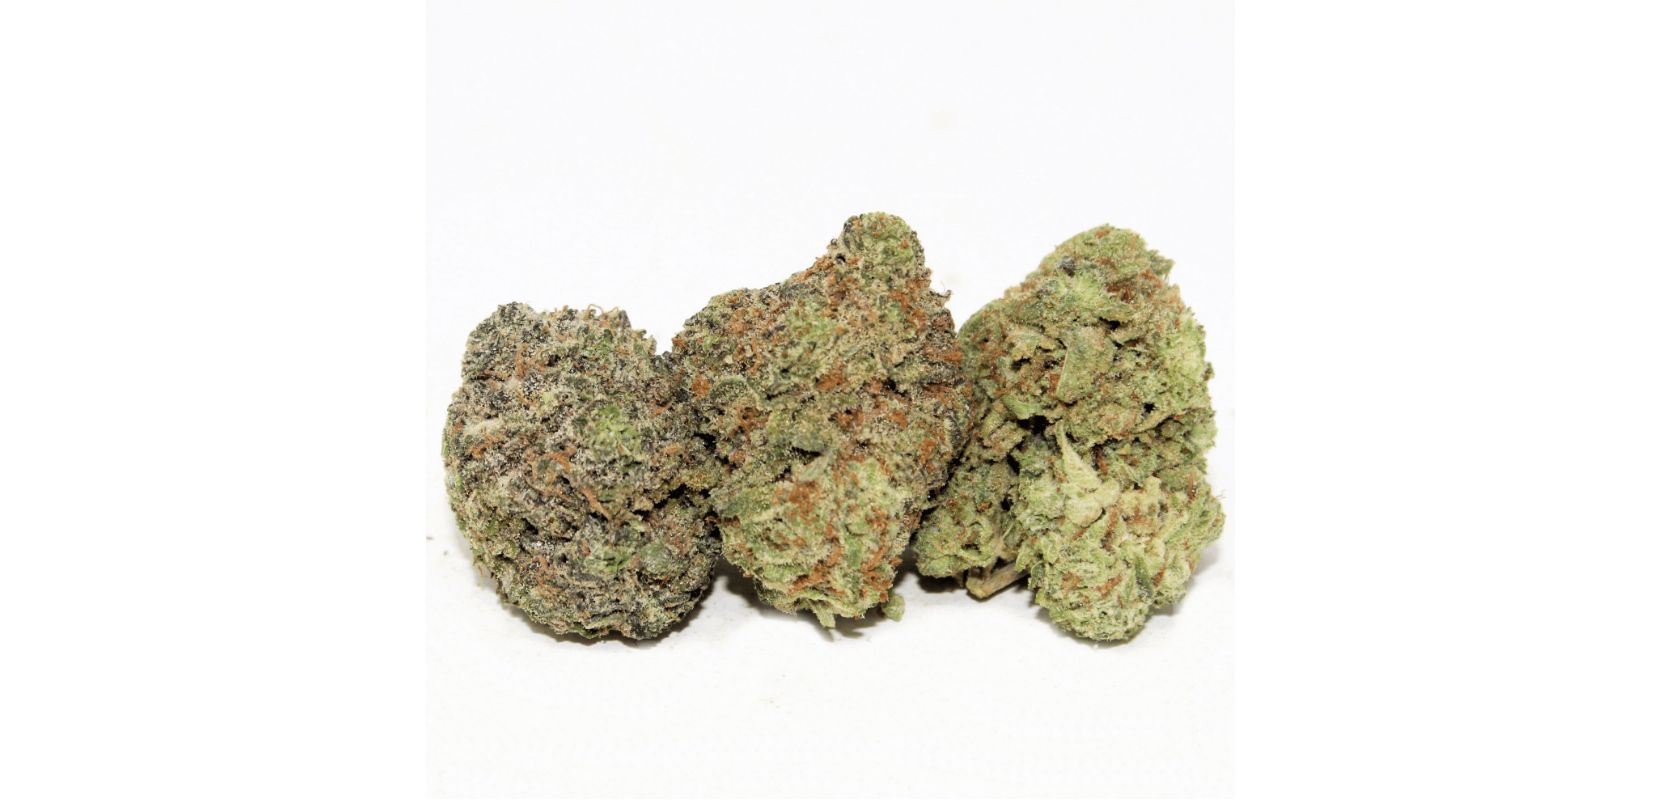 While choosing wholesale weed in Canada is one of the best ways to save money, there are some other perks to consider.